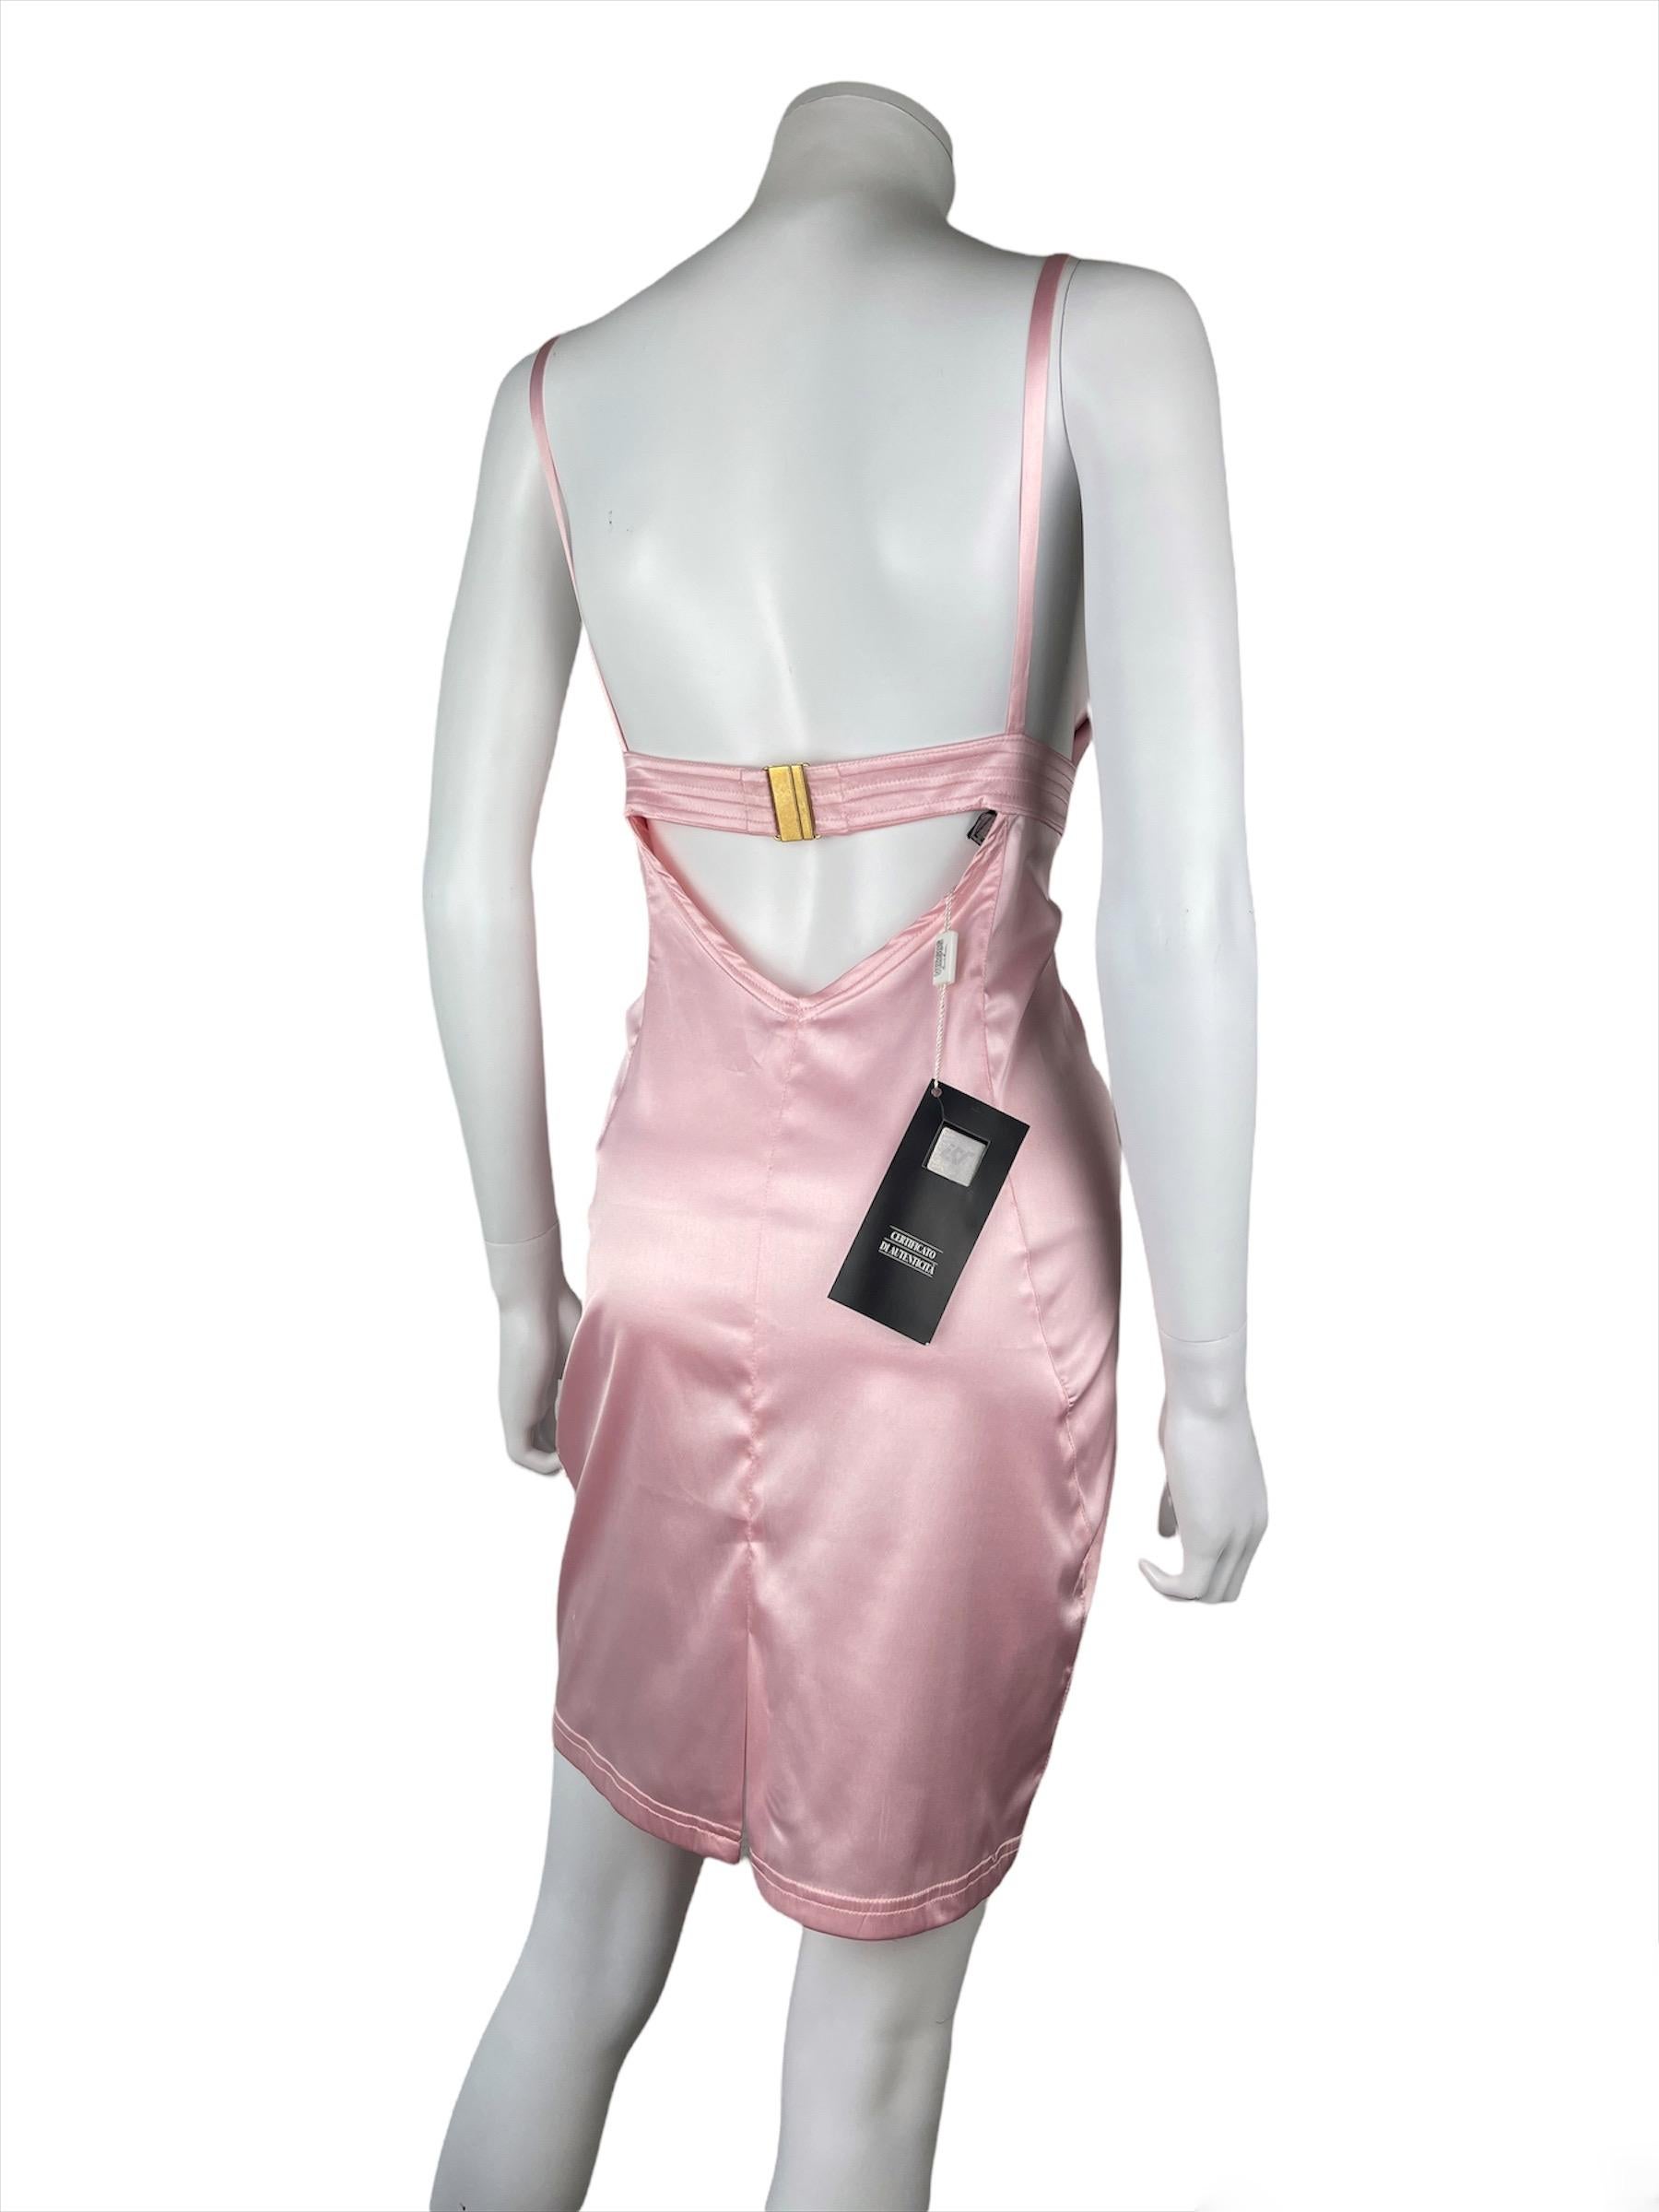 VERSUS by Gianni Versace, Made in Italy, circa 90’s.
Pink bodycon mini dress designed by Gianni Versace for Versus. 
This dress has a very Y2K vibe with her shiny pink color.
The dress is stretchy and has a bit of a latex effect. 
It is too big for